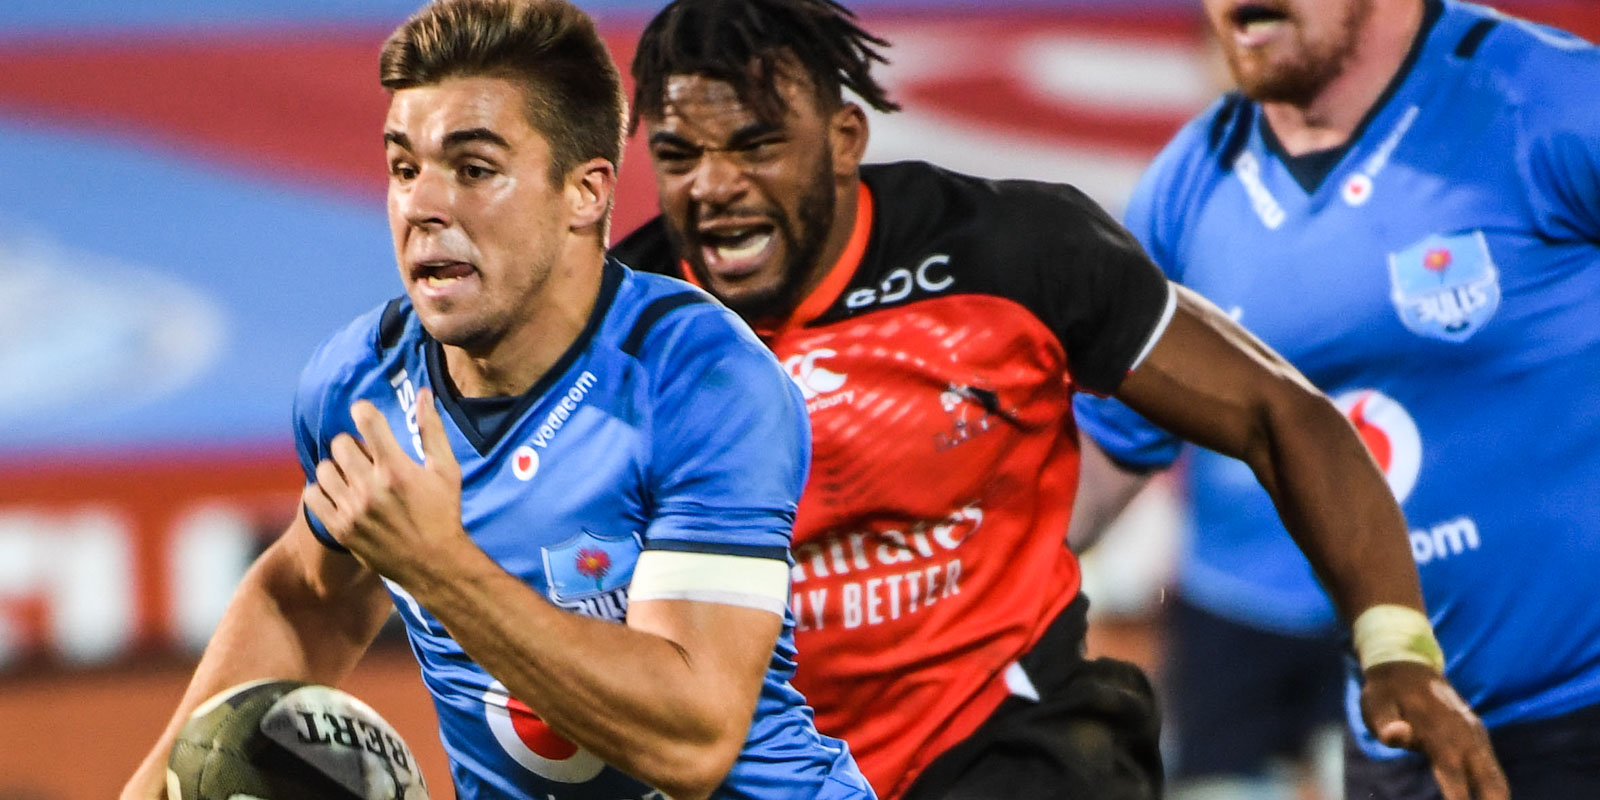 Zak Burger races away for one of the Vodacom Bulls' three tries.